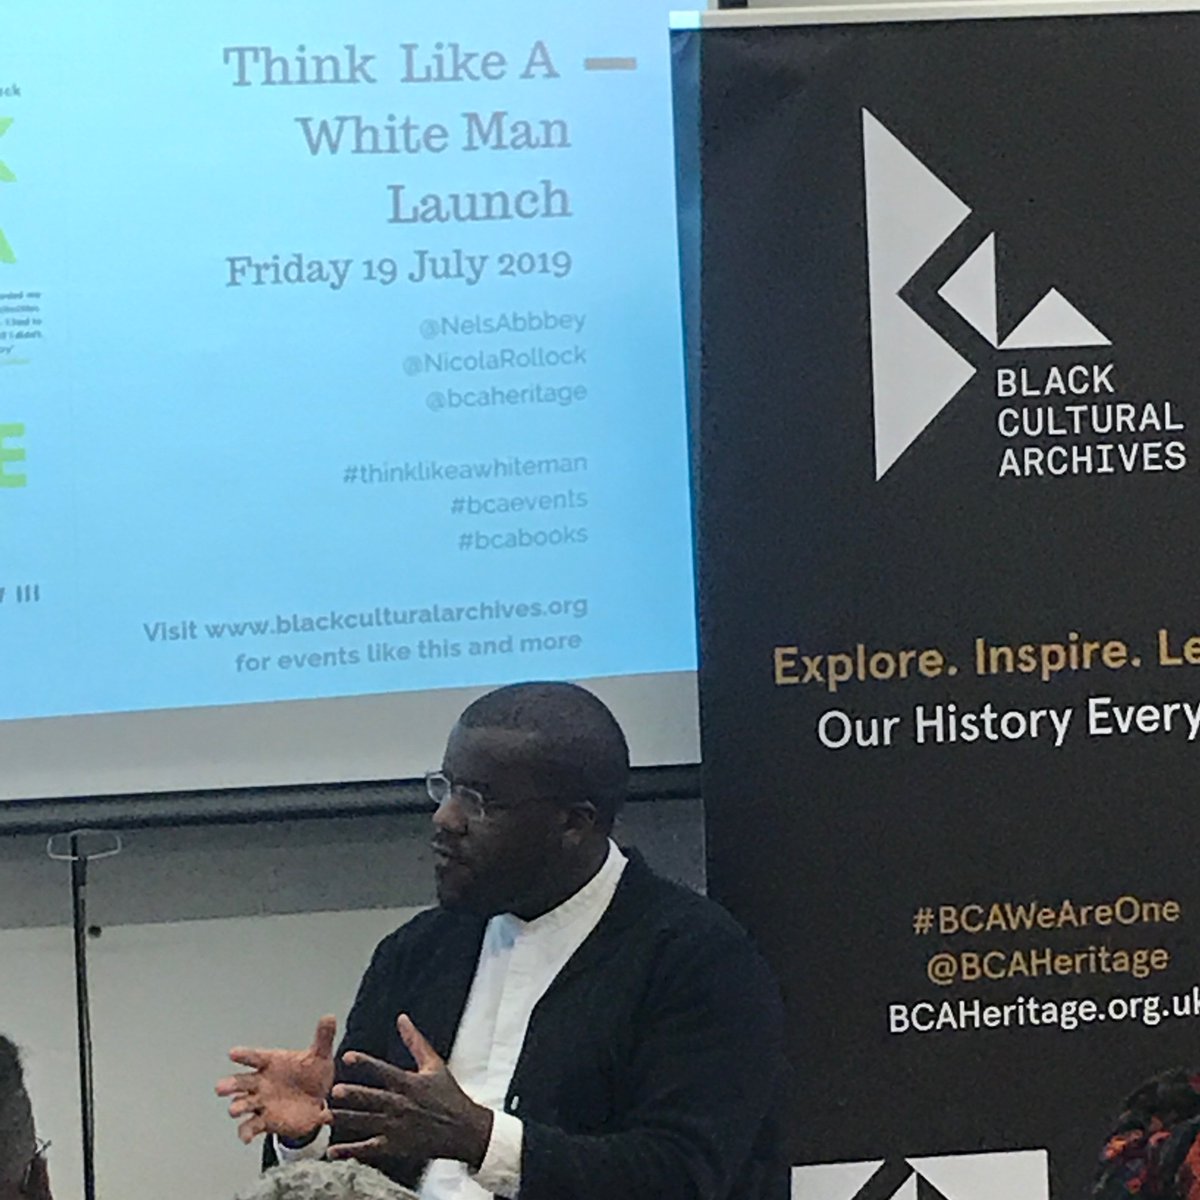 Author Nels Abbey (@NelsAbbey) talks about how humour acts a survival tactic when dealing with white spaces #bcabooks #bcaevents #BlackBritishLiterature #BlackBritishTalent